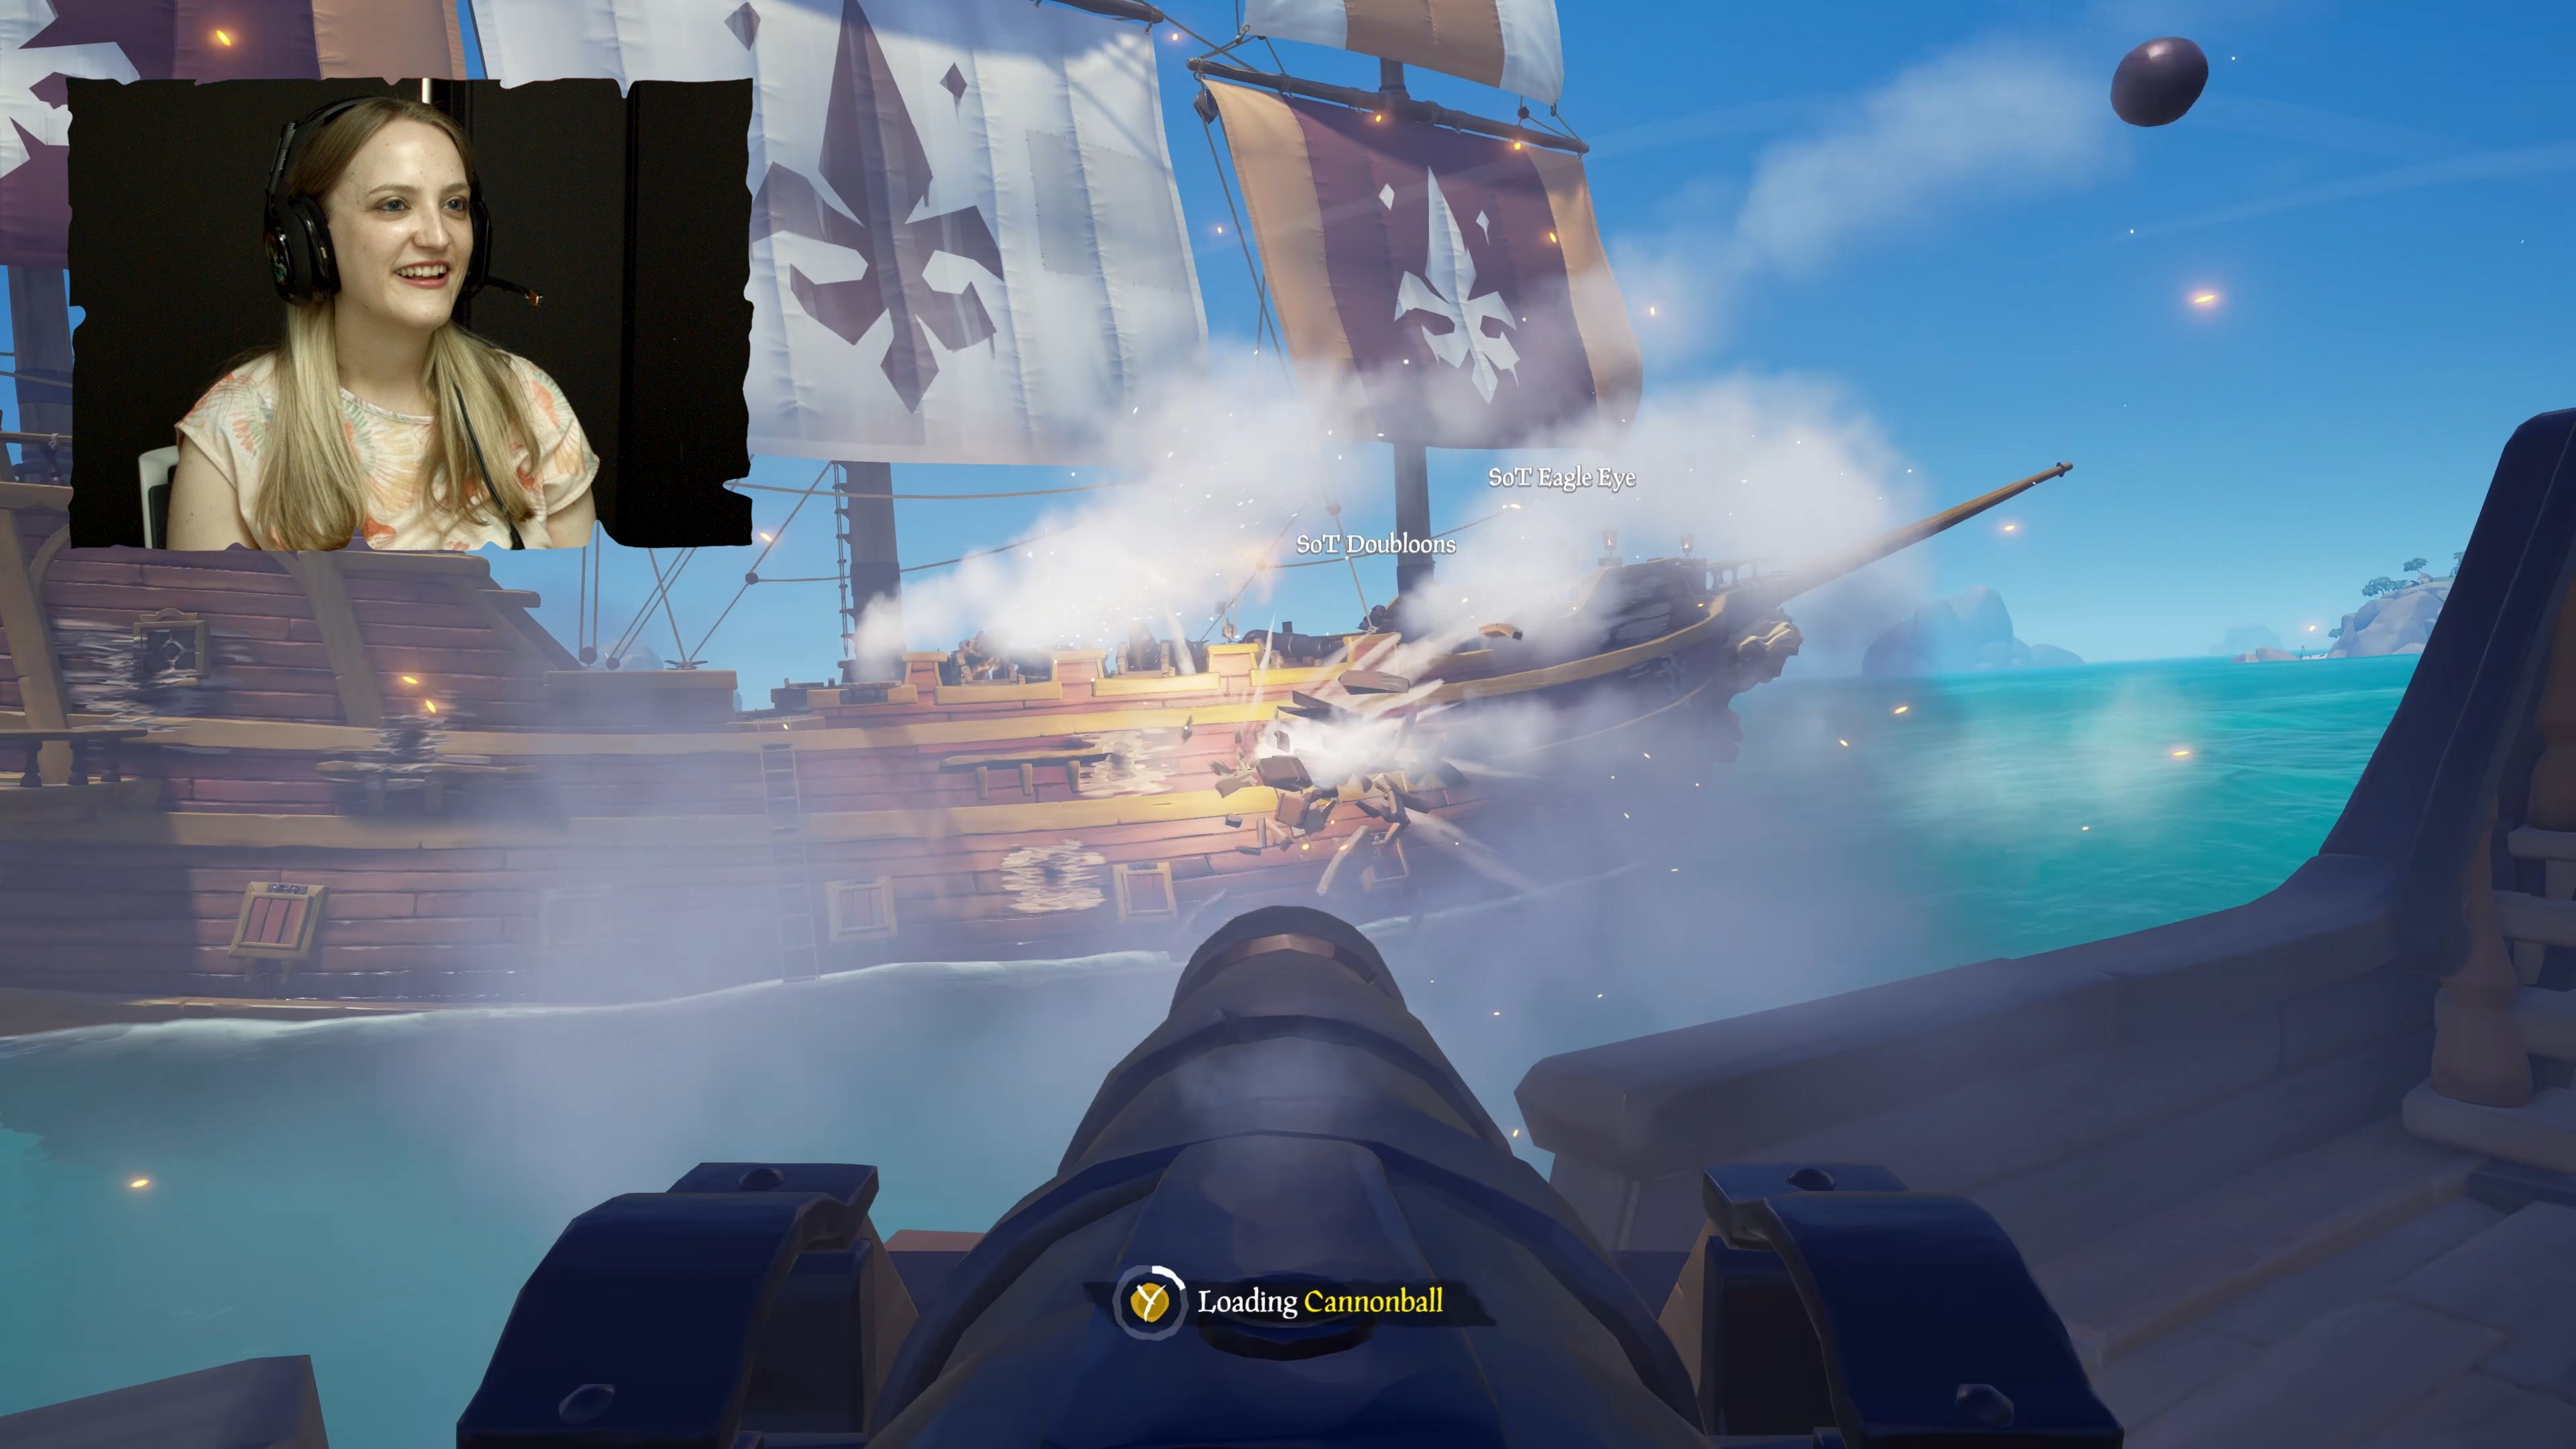 Sea of thieves ps4. Игра Sea of Thieves. Sea of Thieves PLAYSTATION. Sea of Thieves on ps4. Sea of Thieves на пс4.